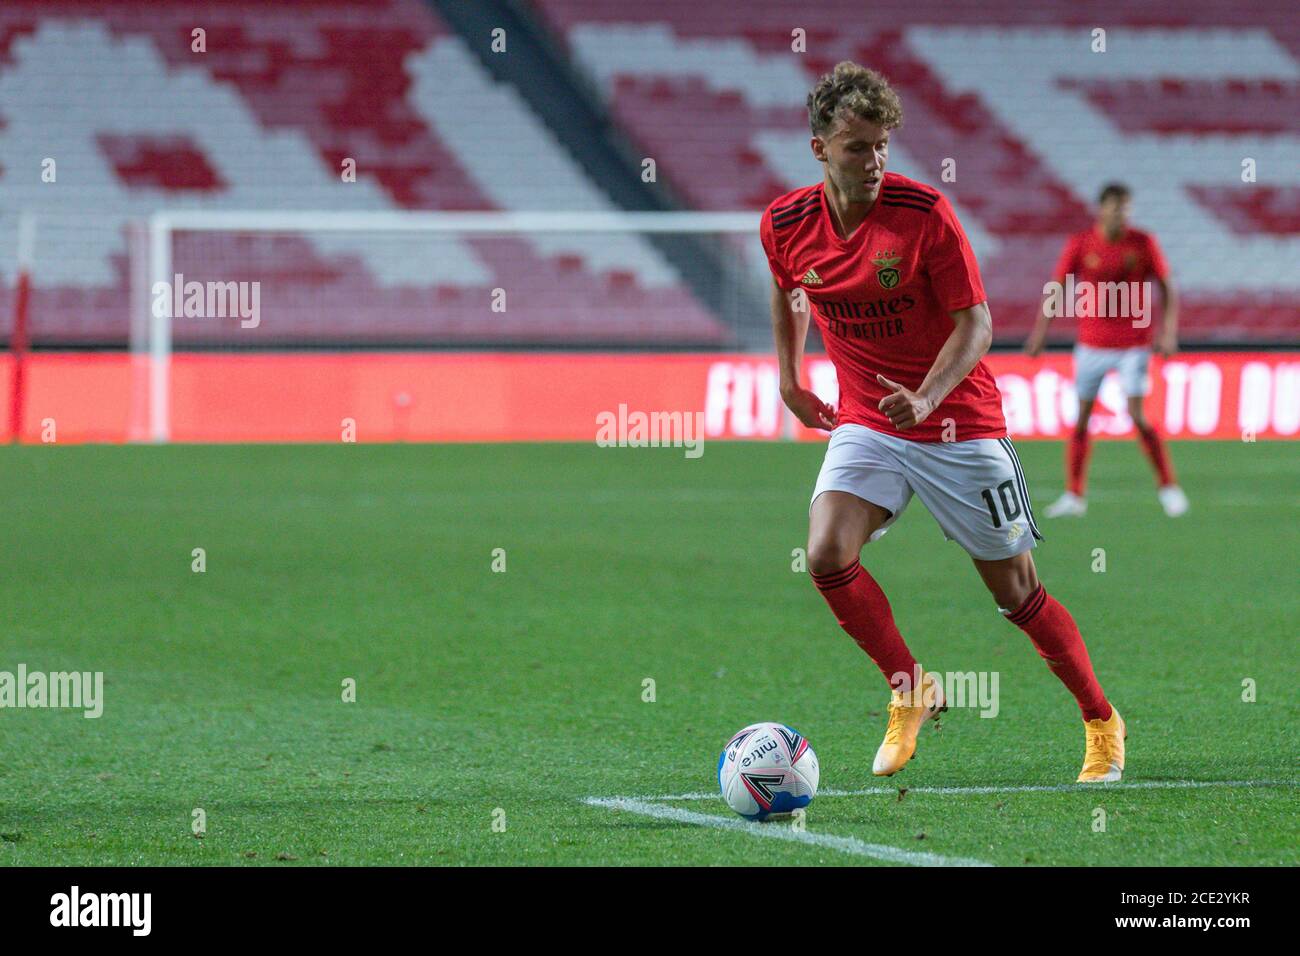 Lisbon, Portugal. August 30, 2020. Lisbon, Portugal. Benfica's forward from Germany Luca Waldschmidt (10) in action during the friendly game between SL Benfica vs AFC Bournemouth Credit: Alexandre de Sousa/Alamy Live News Stock Photo